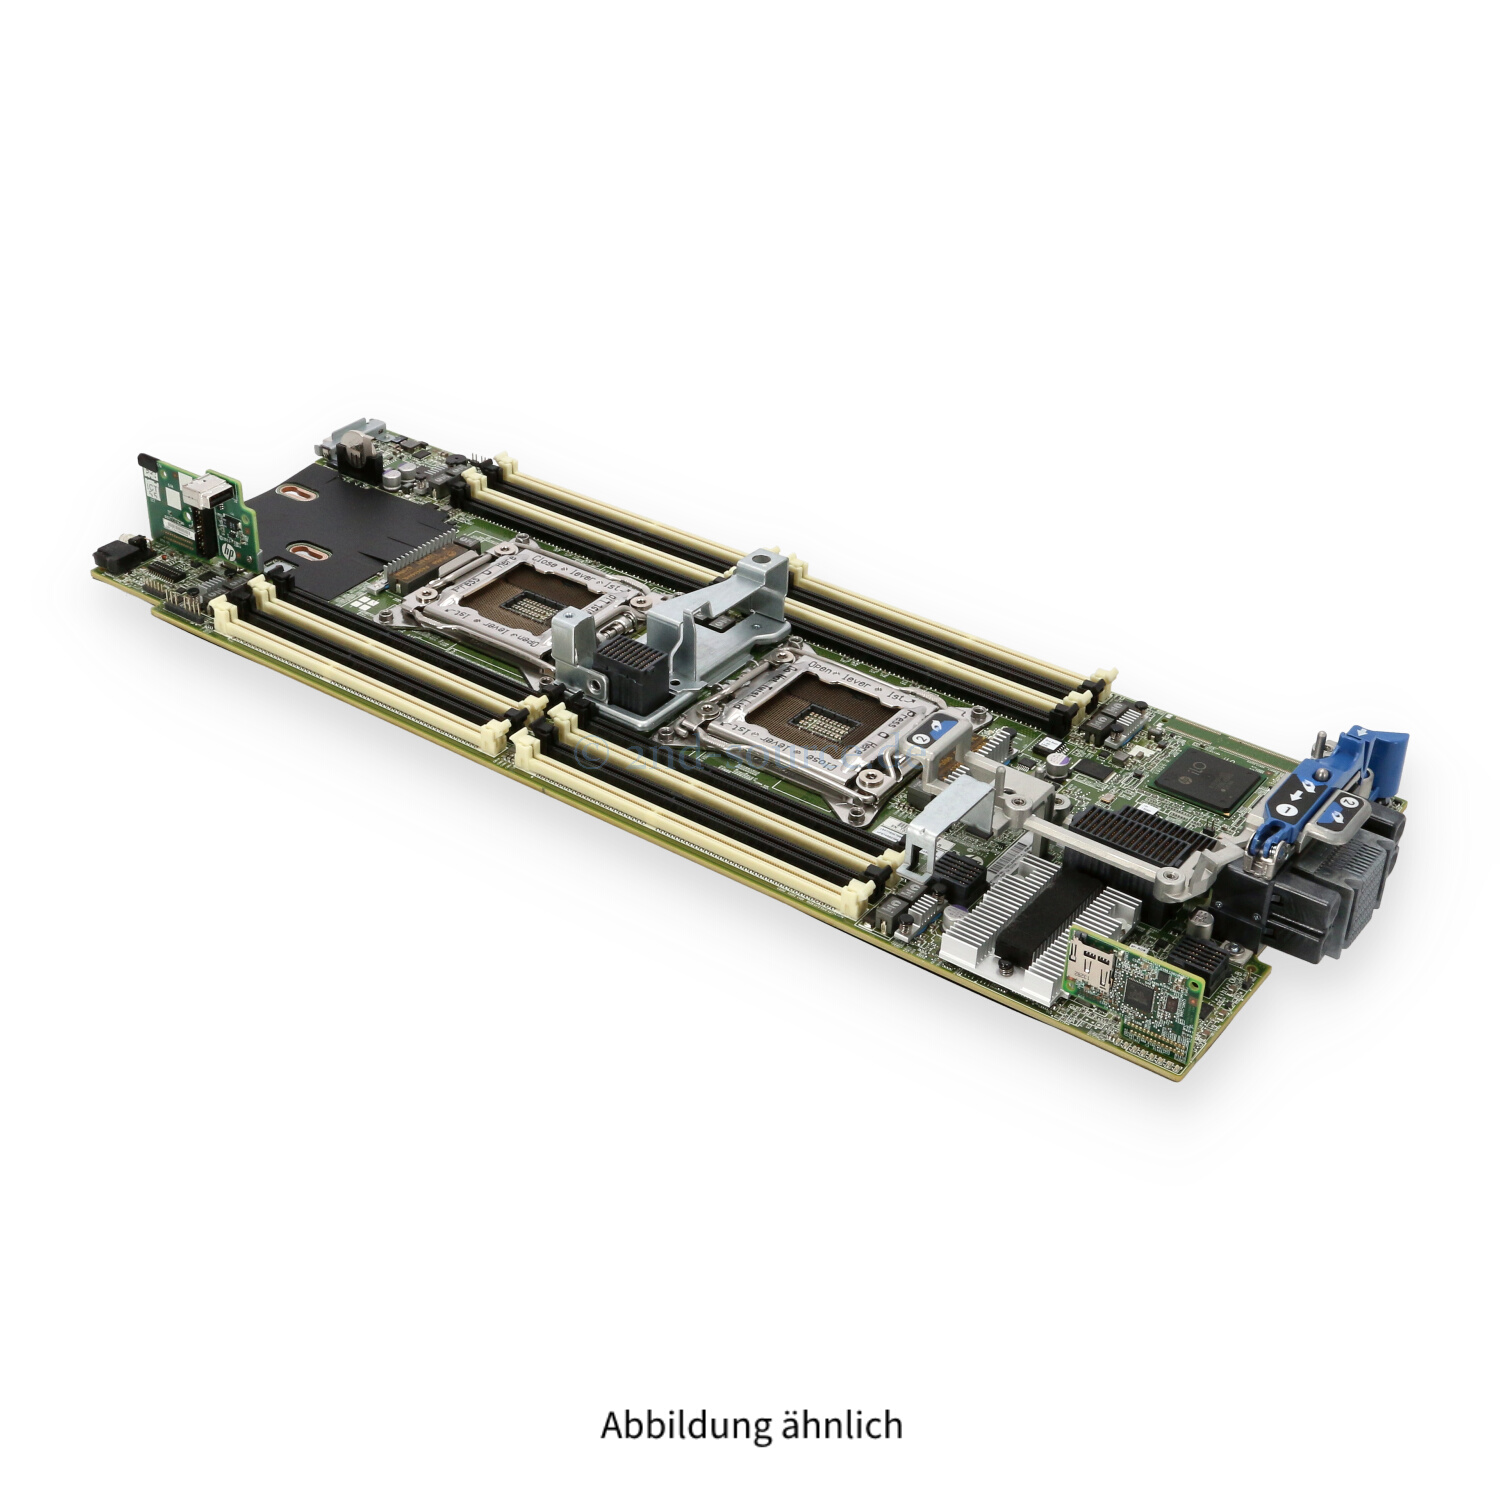 HPE Systemboard BL460c G8 716550-001